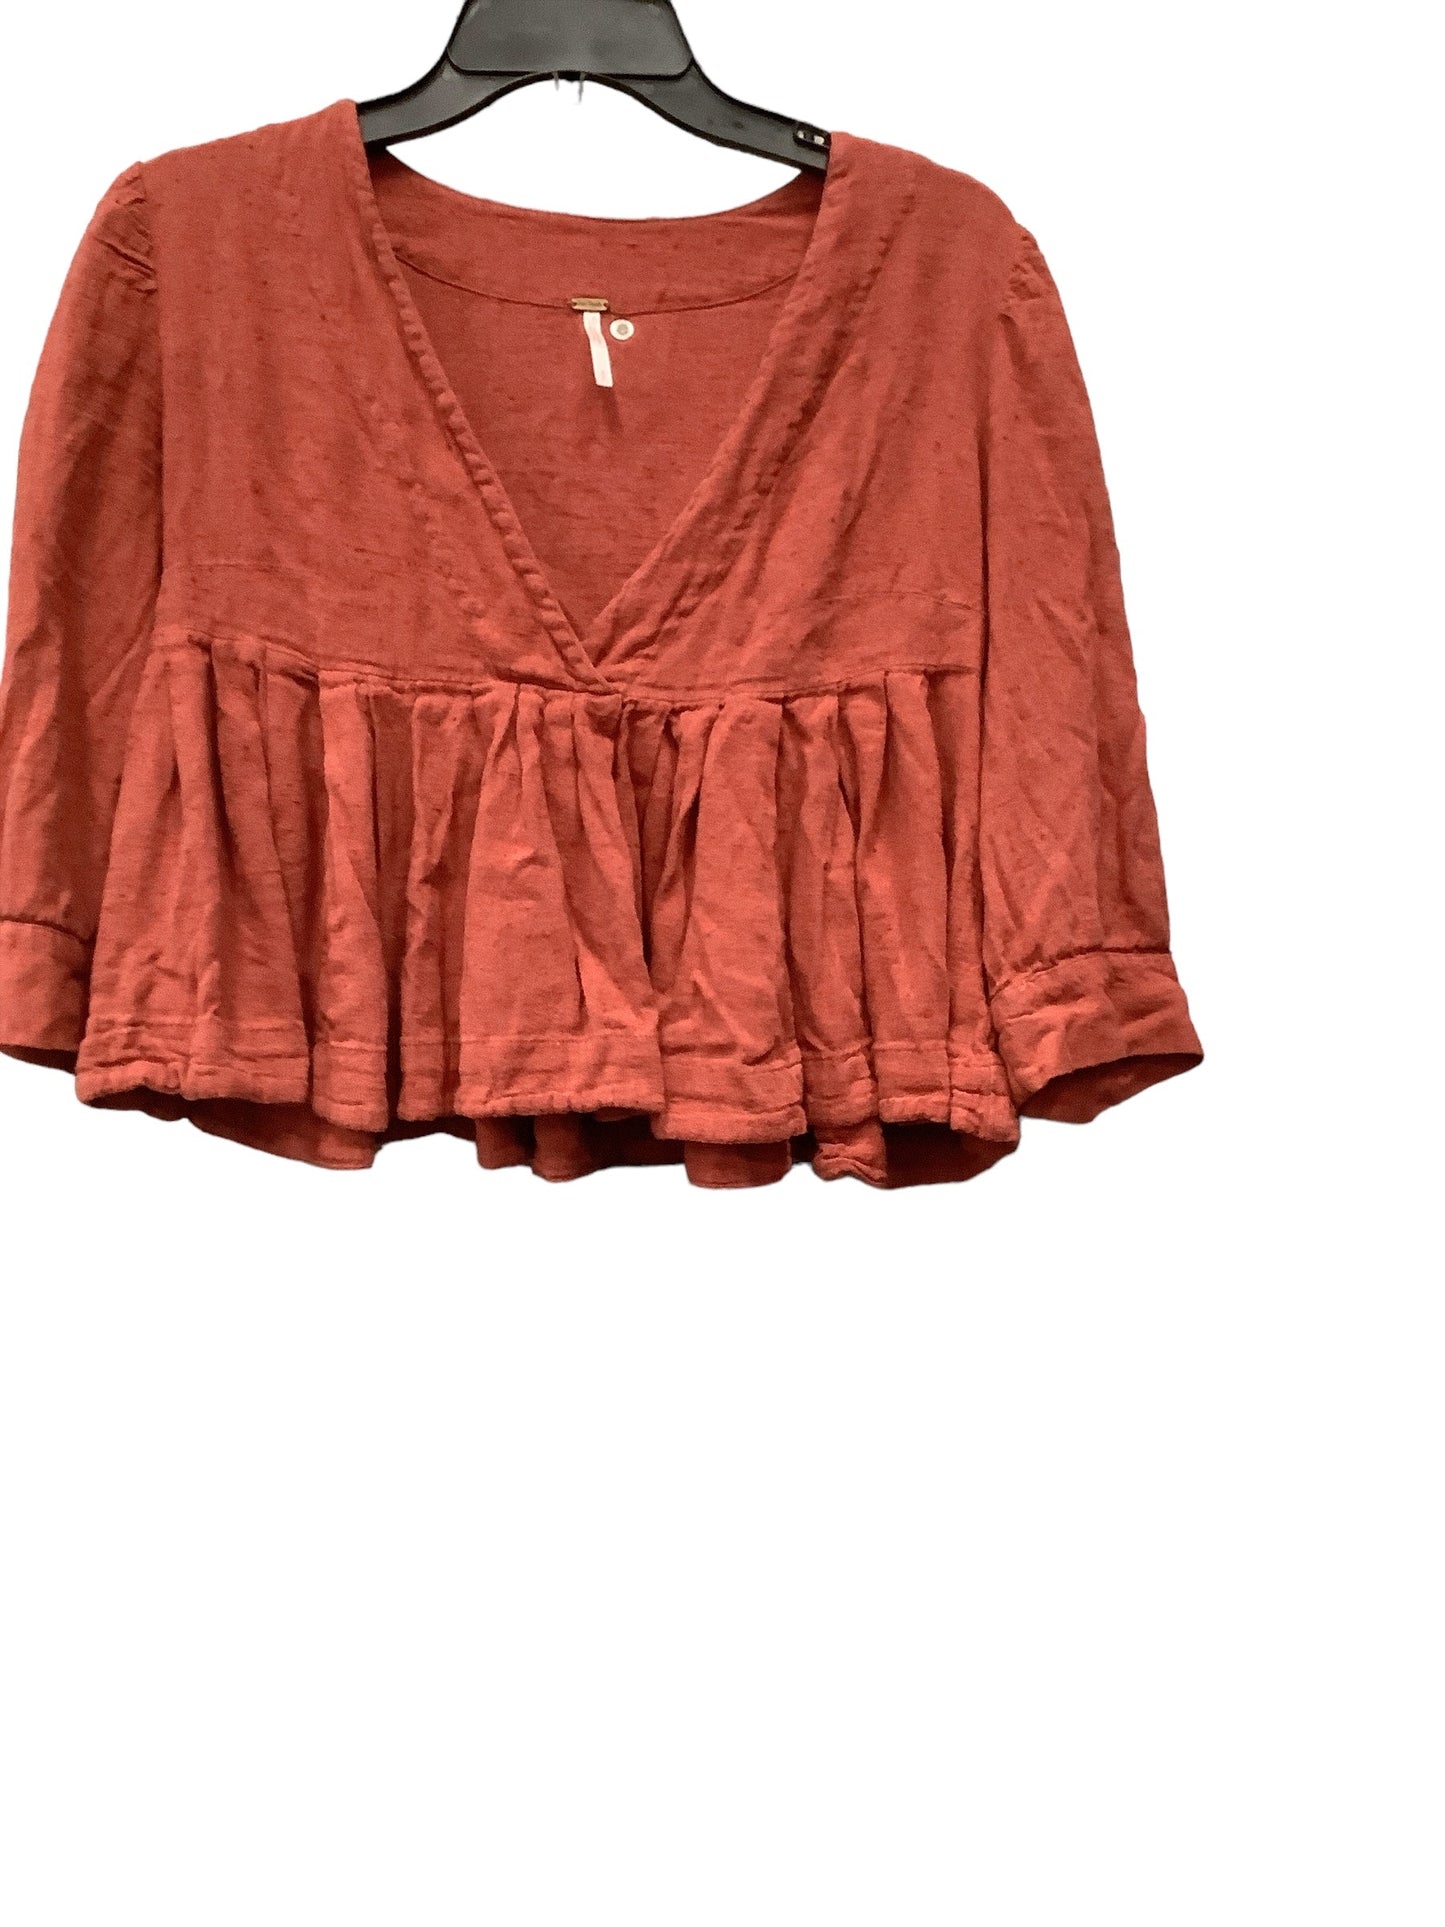 Red Top 3/4 Sleeve Free People, Size S